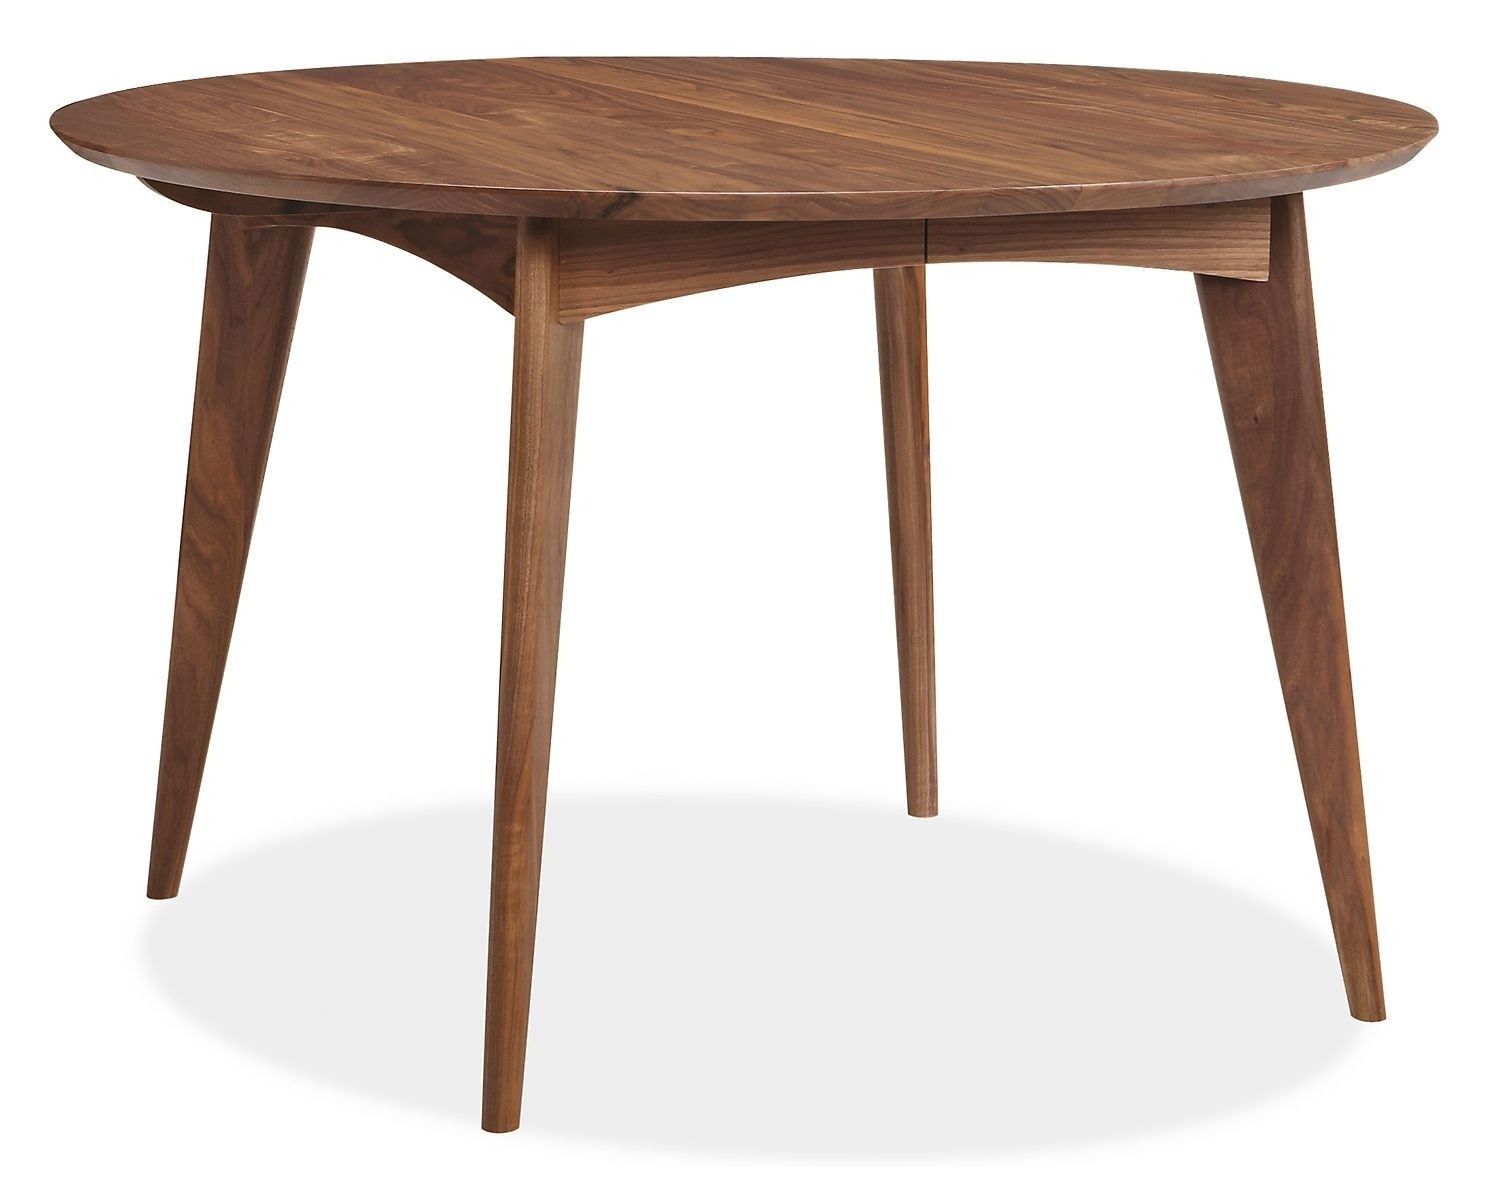 Dining table with two leaves